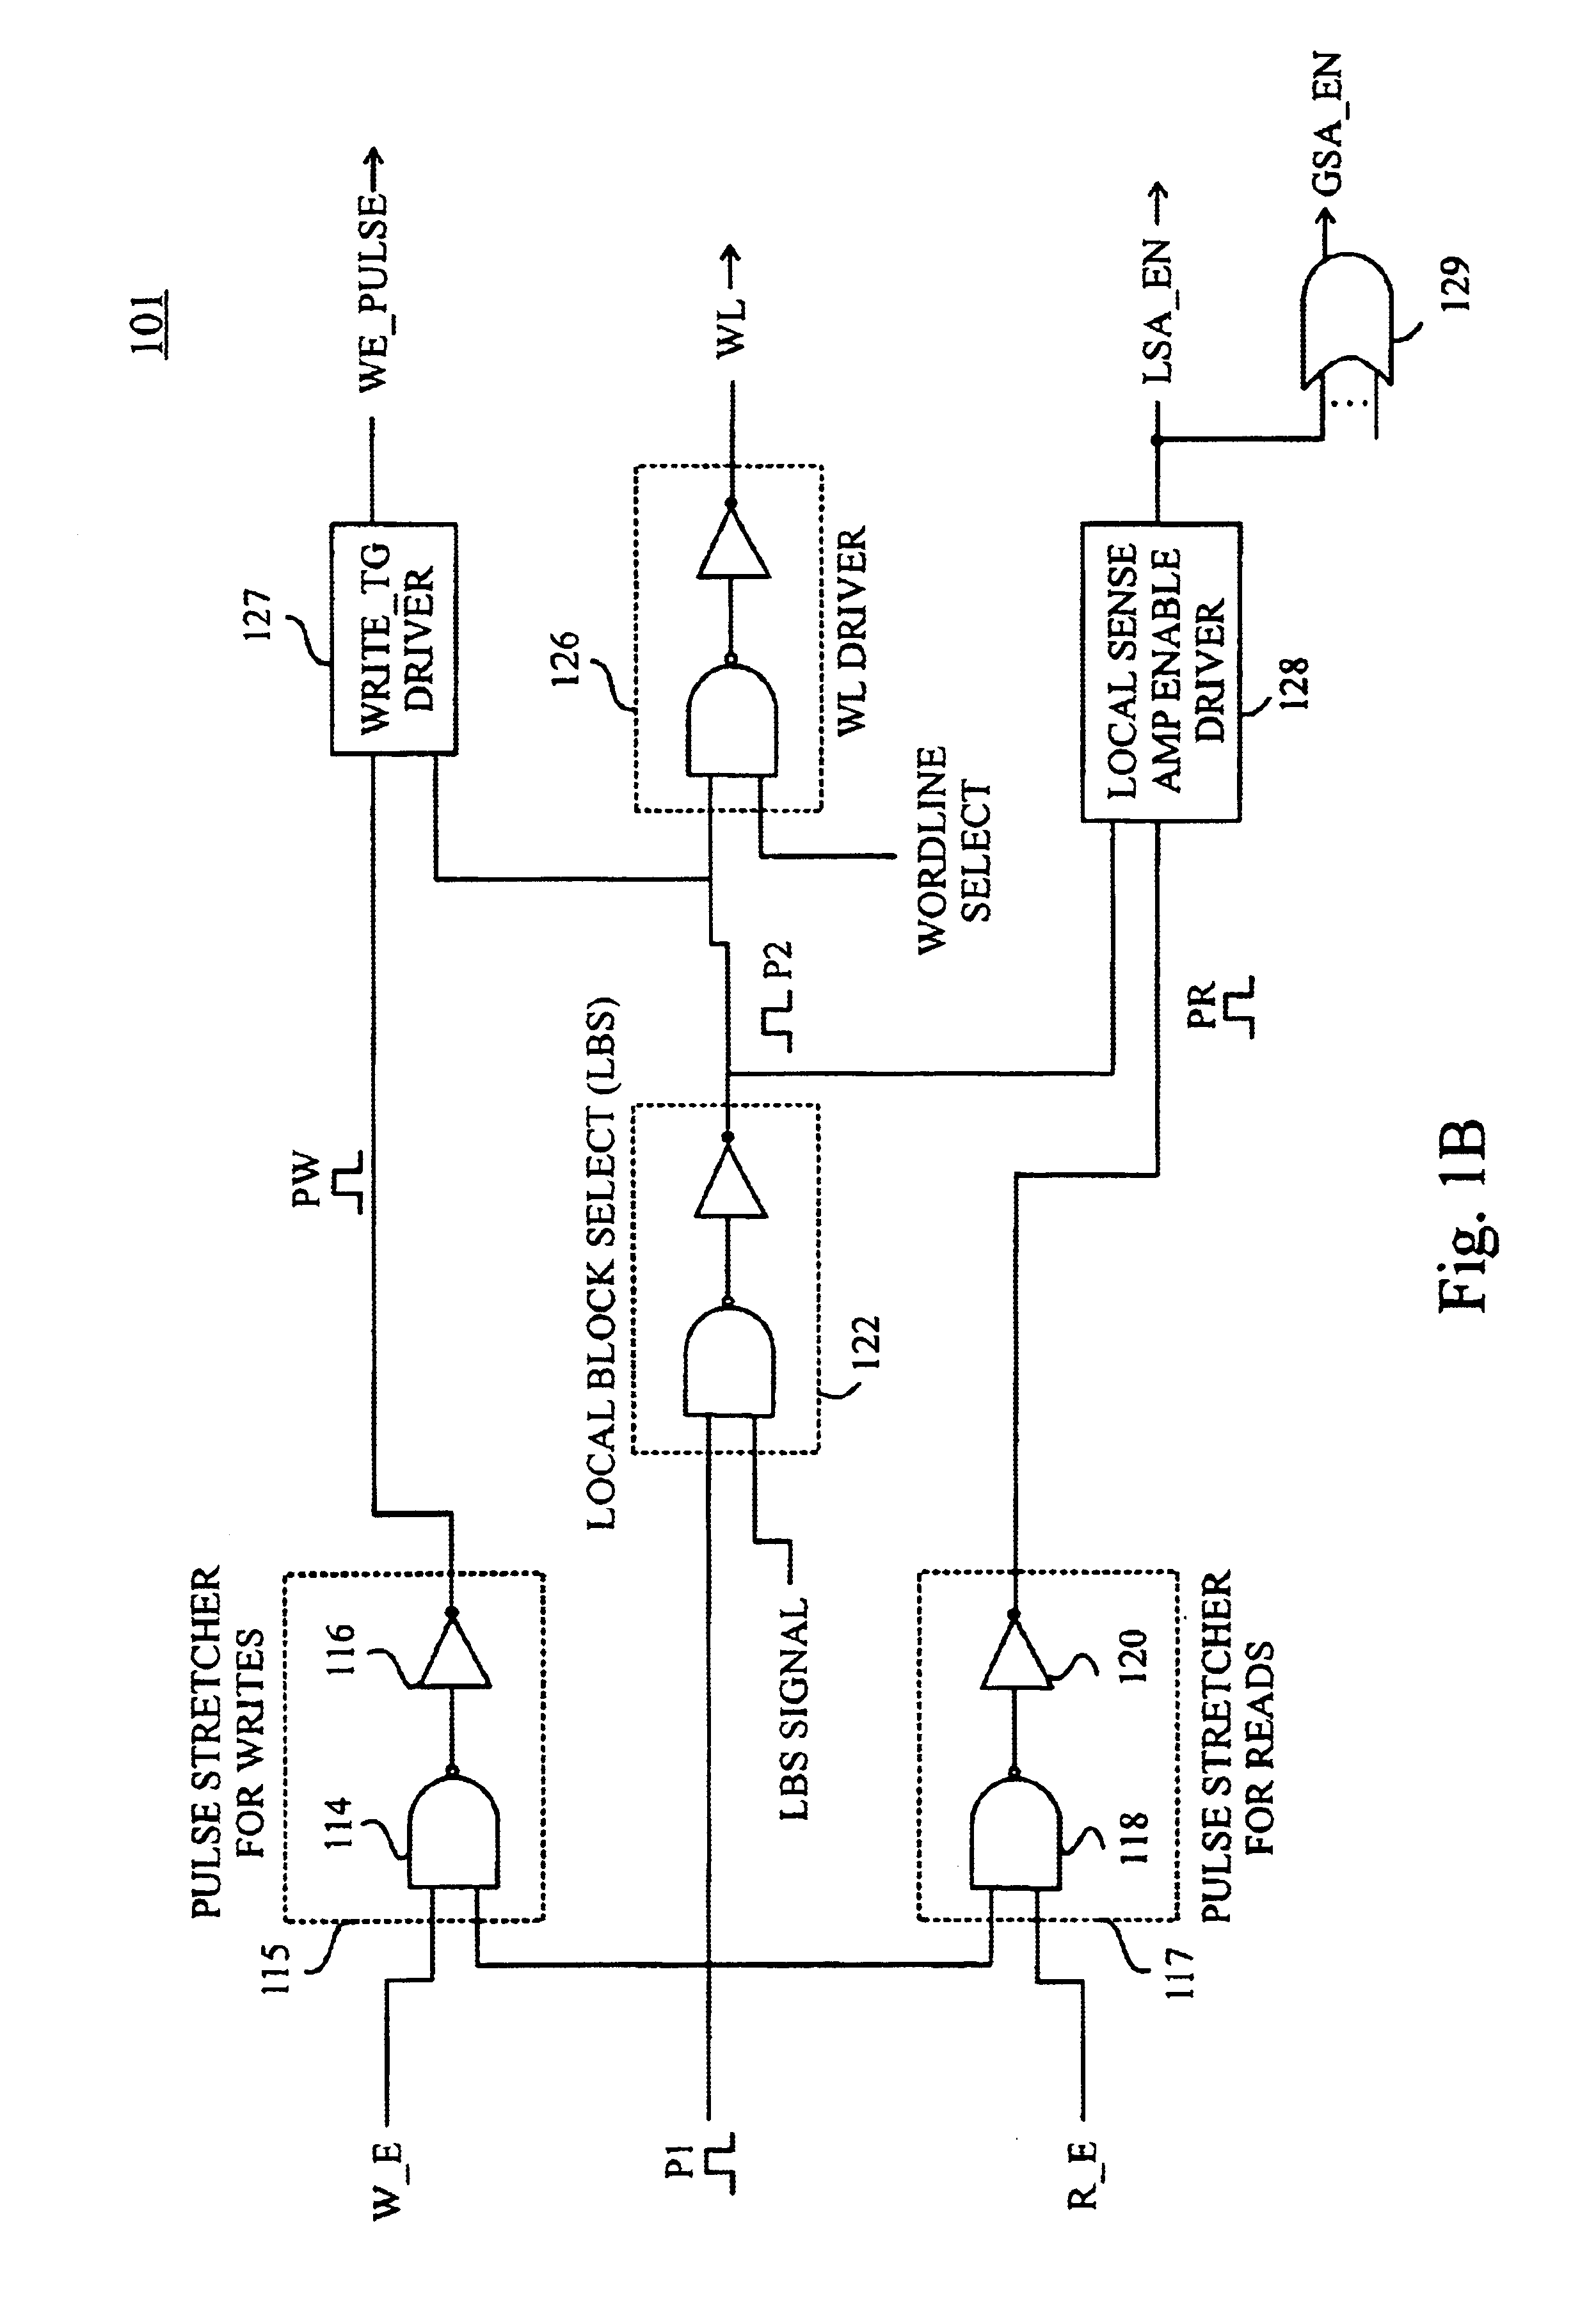 Decode path gated low active power SRAM